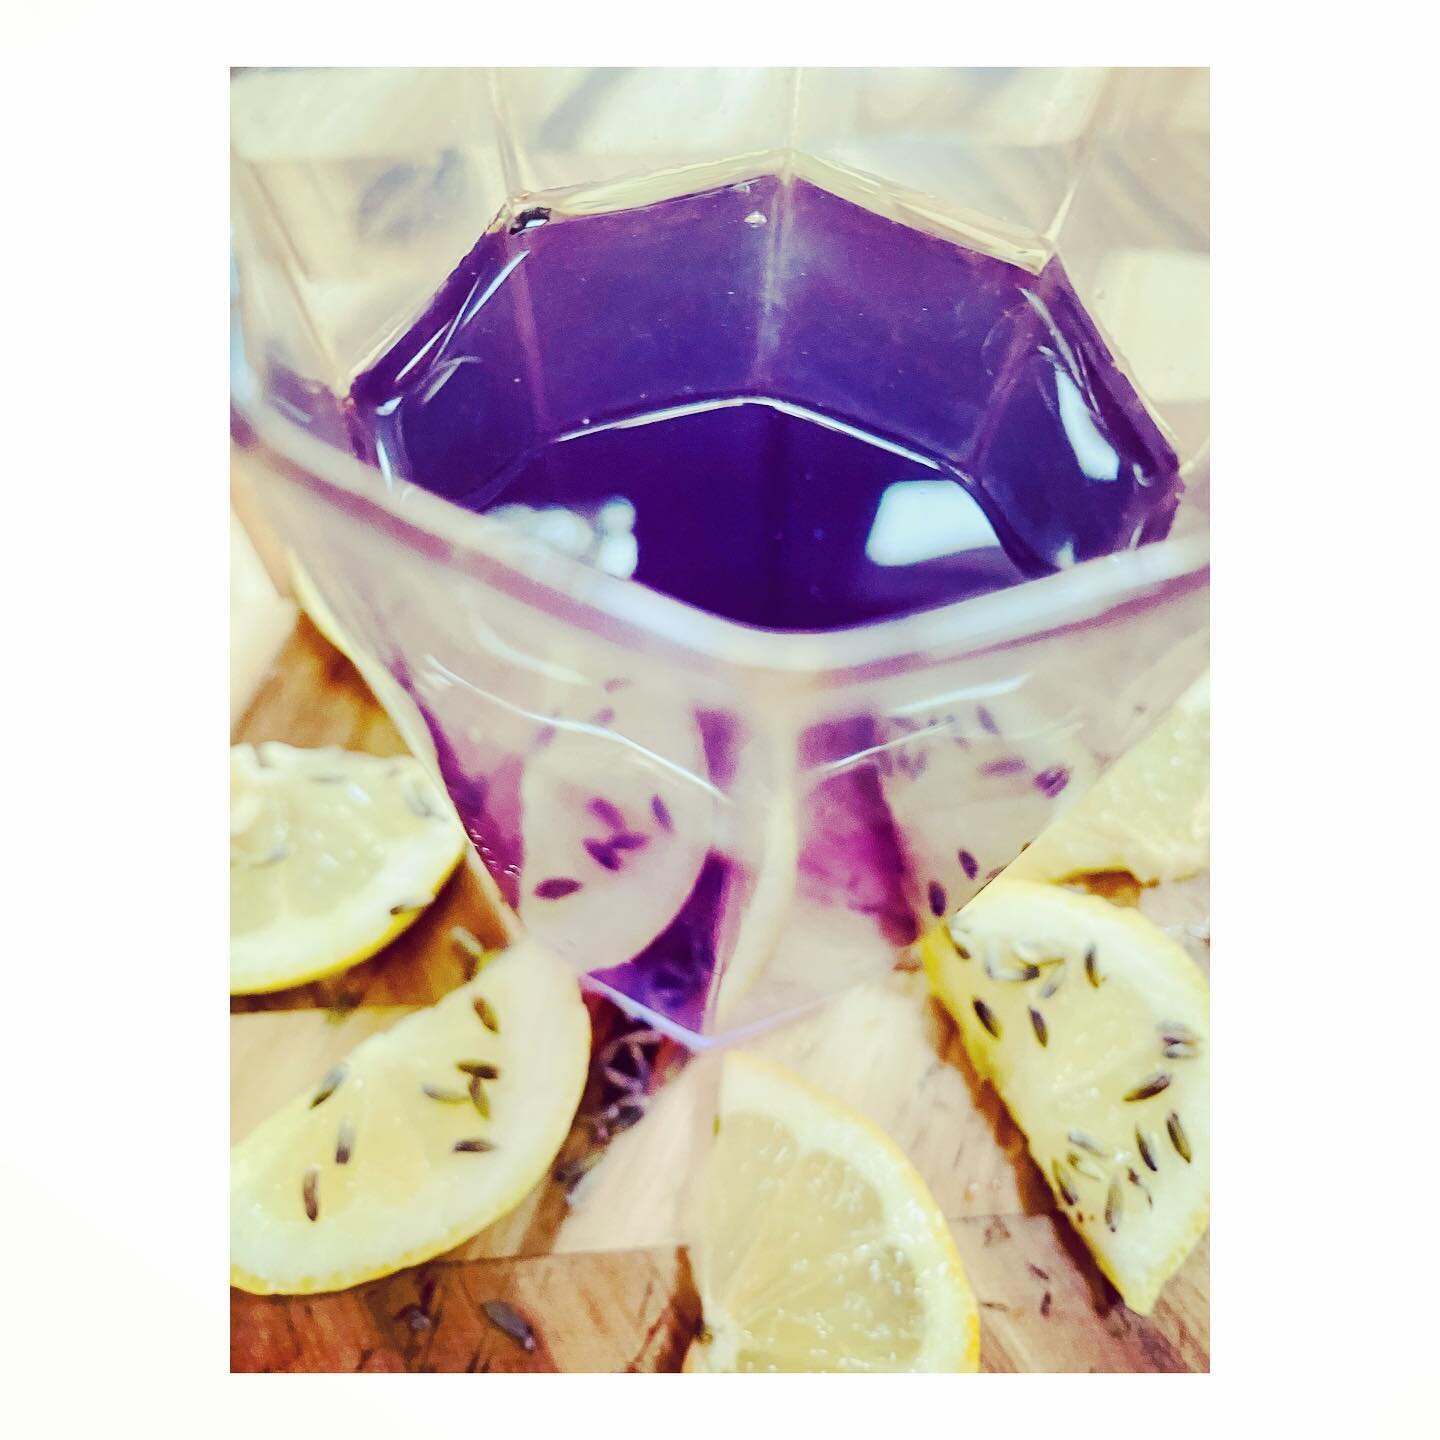 B&euro;aUt&yen; Wat&pound;R
.
💜Lavender Lemon Love Drop 💜
.
.
Serving this goodness for our Cosmic Beauty Workshop. Here is the recipe:
8 cups filtered 💧 water
1 tbsp 🦋  butterfly pea powder
6 muddled lemons 🍋 
1 cup lavender flower 🌸 infused s